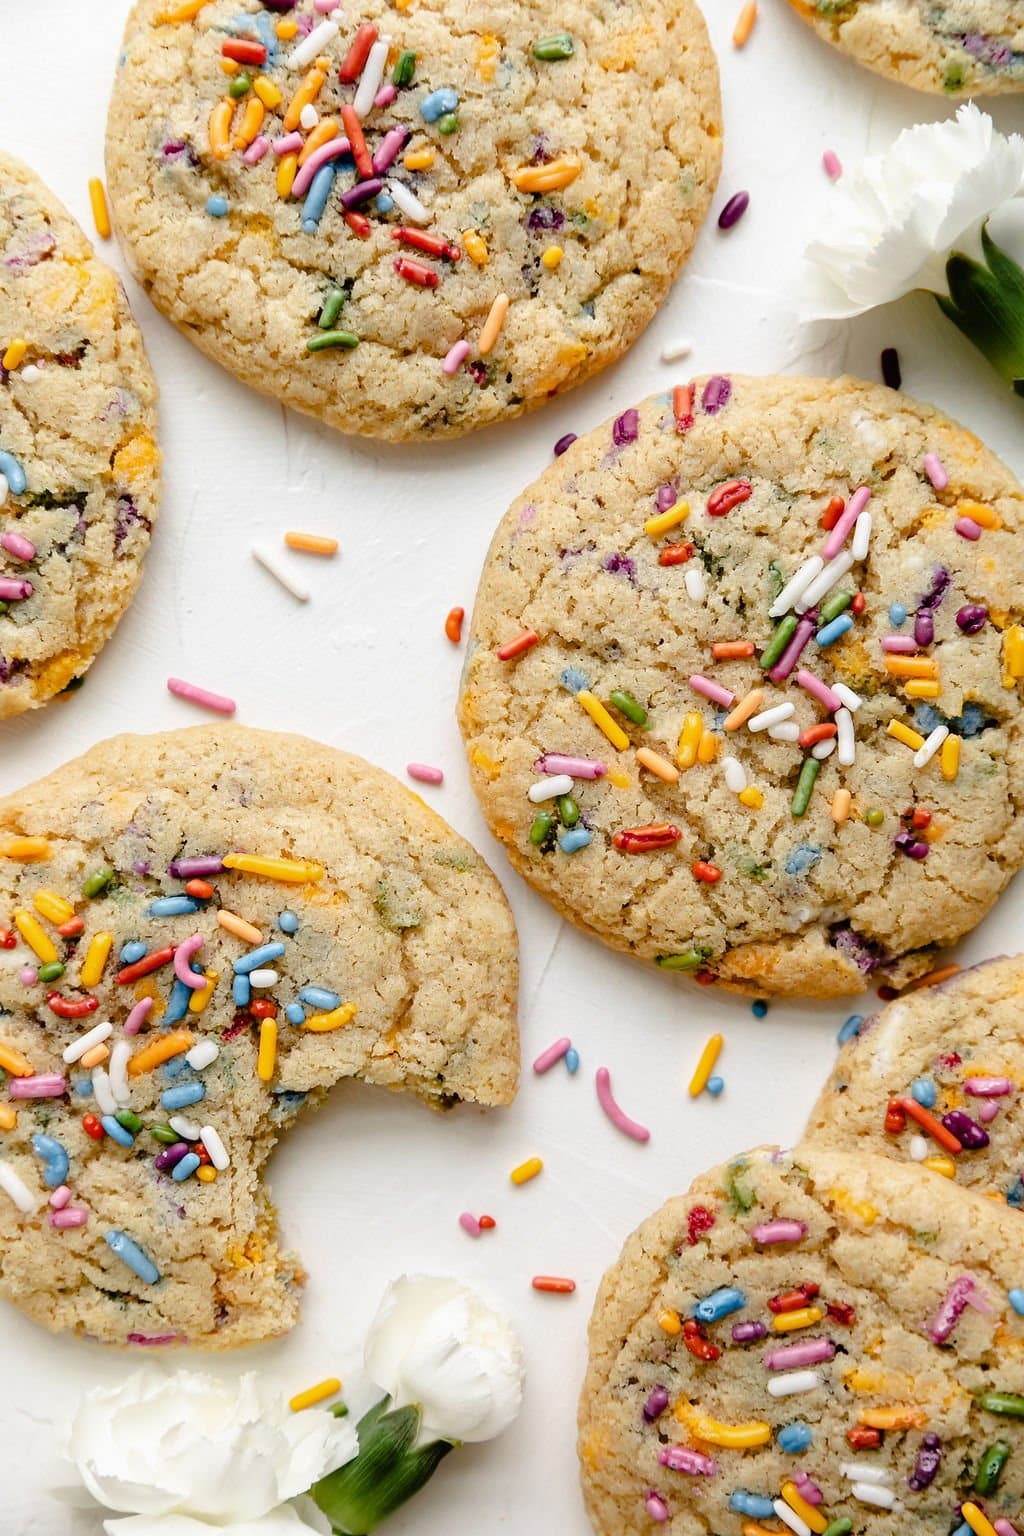 Overhead view of funfetti cookies with extra colored sprinkled on top of each cookie.